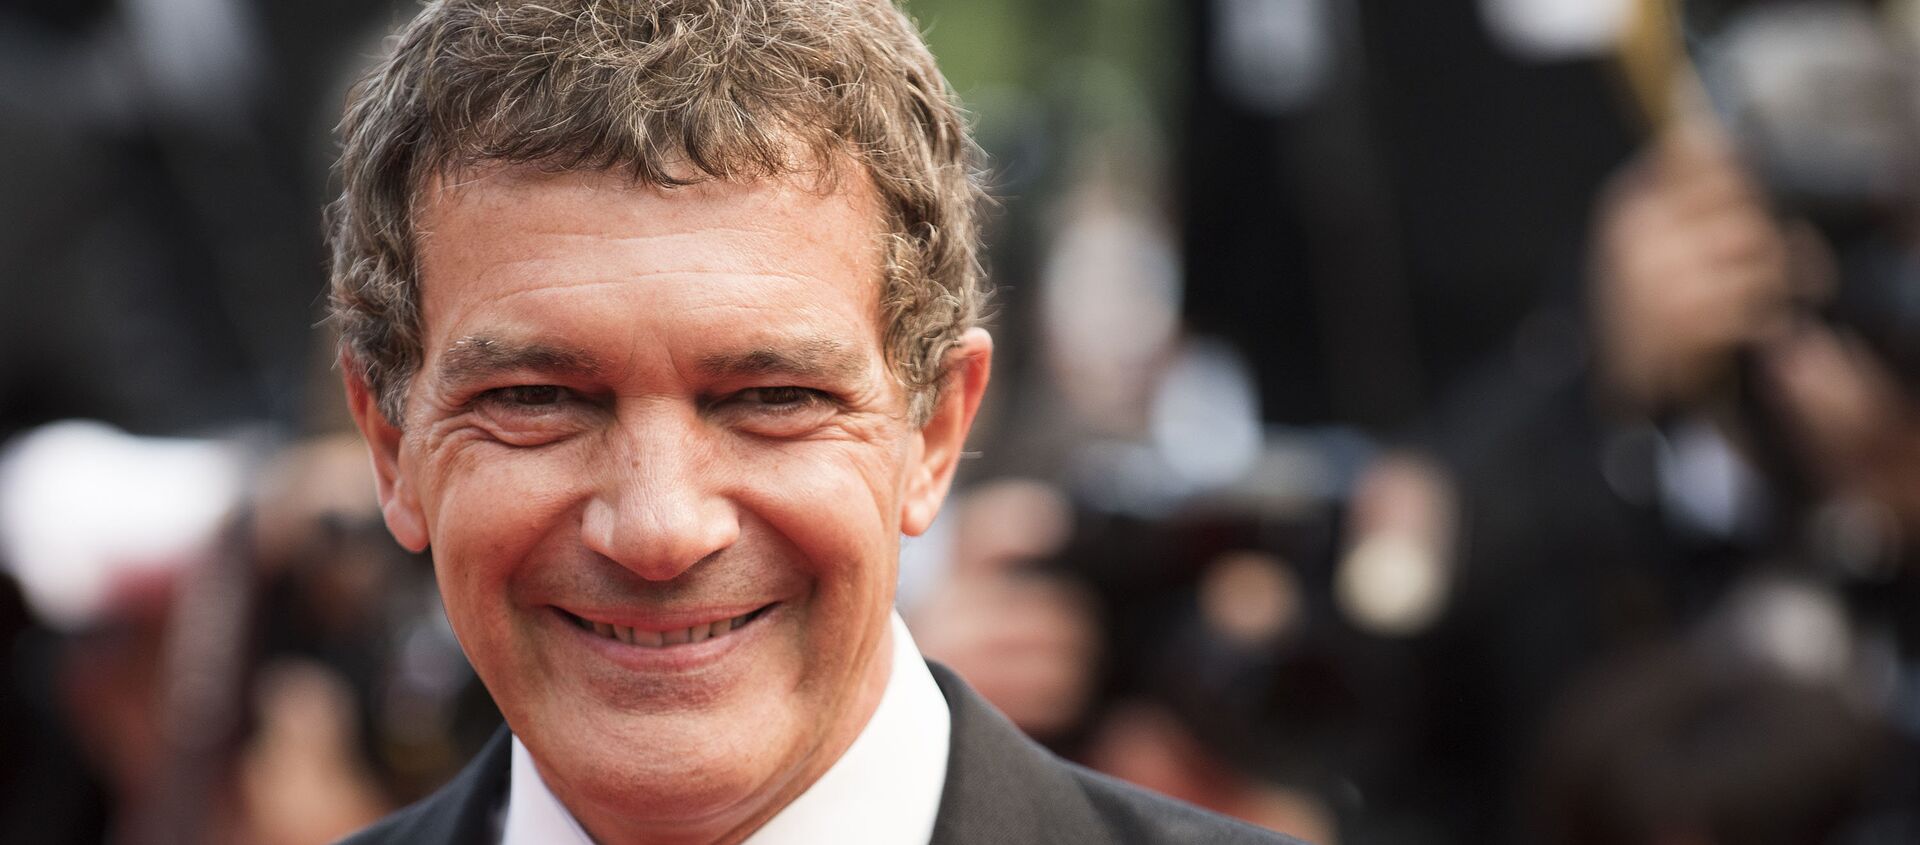 Antonio Banderas arrives for the screening of the film Sicario at the 68th international film festival, Cannes, southern France, Tuesday, May 19, 2015. - Sputnik Mundo, 1920, 26.08.2020